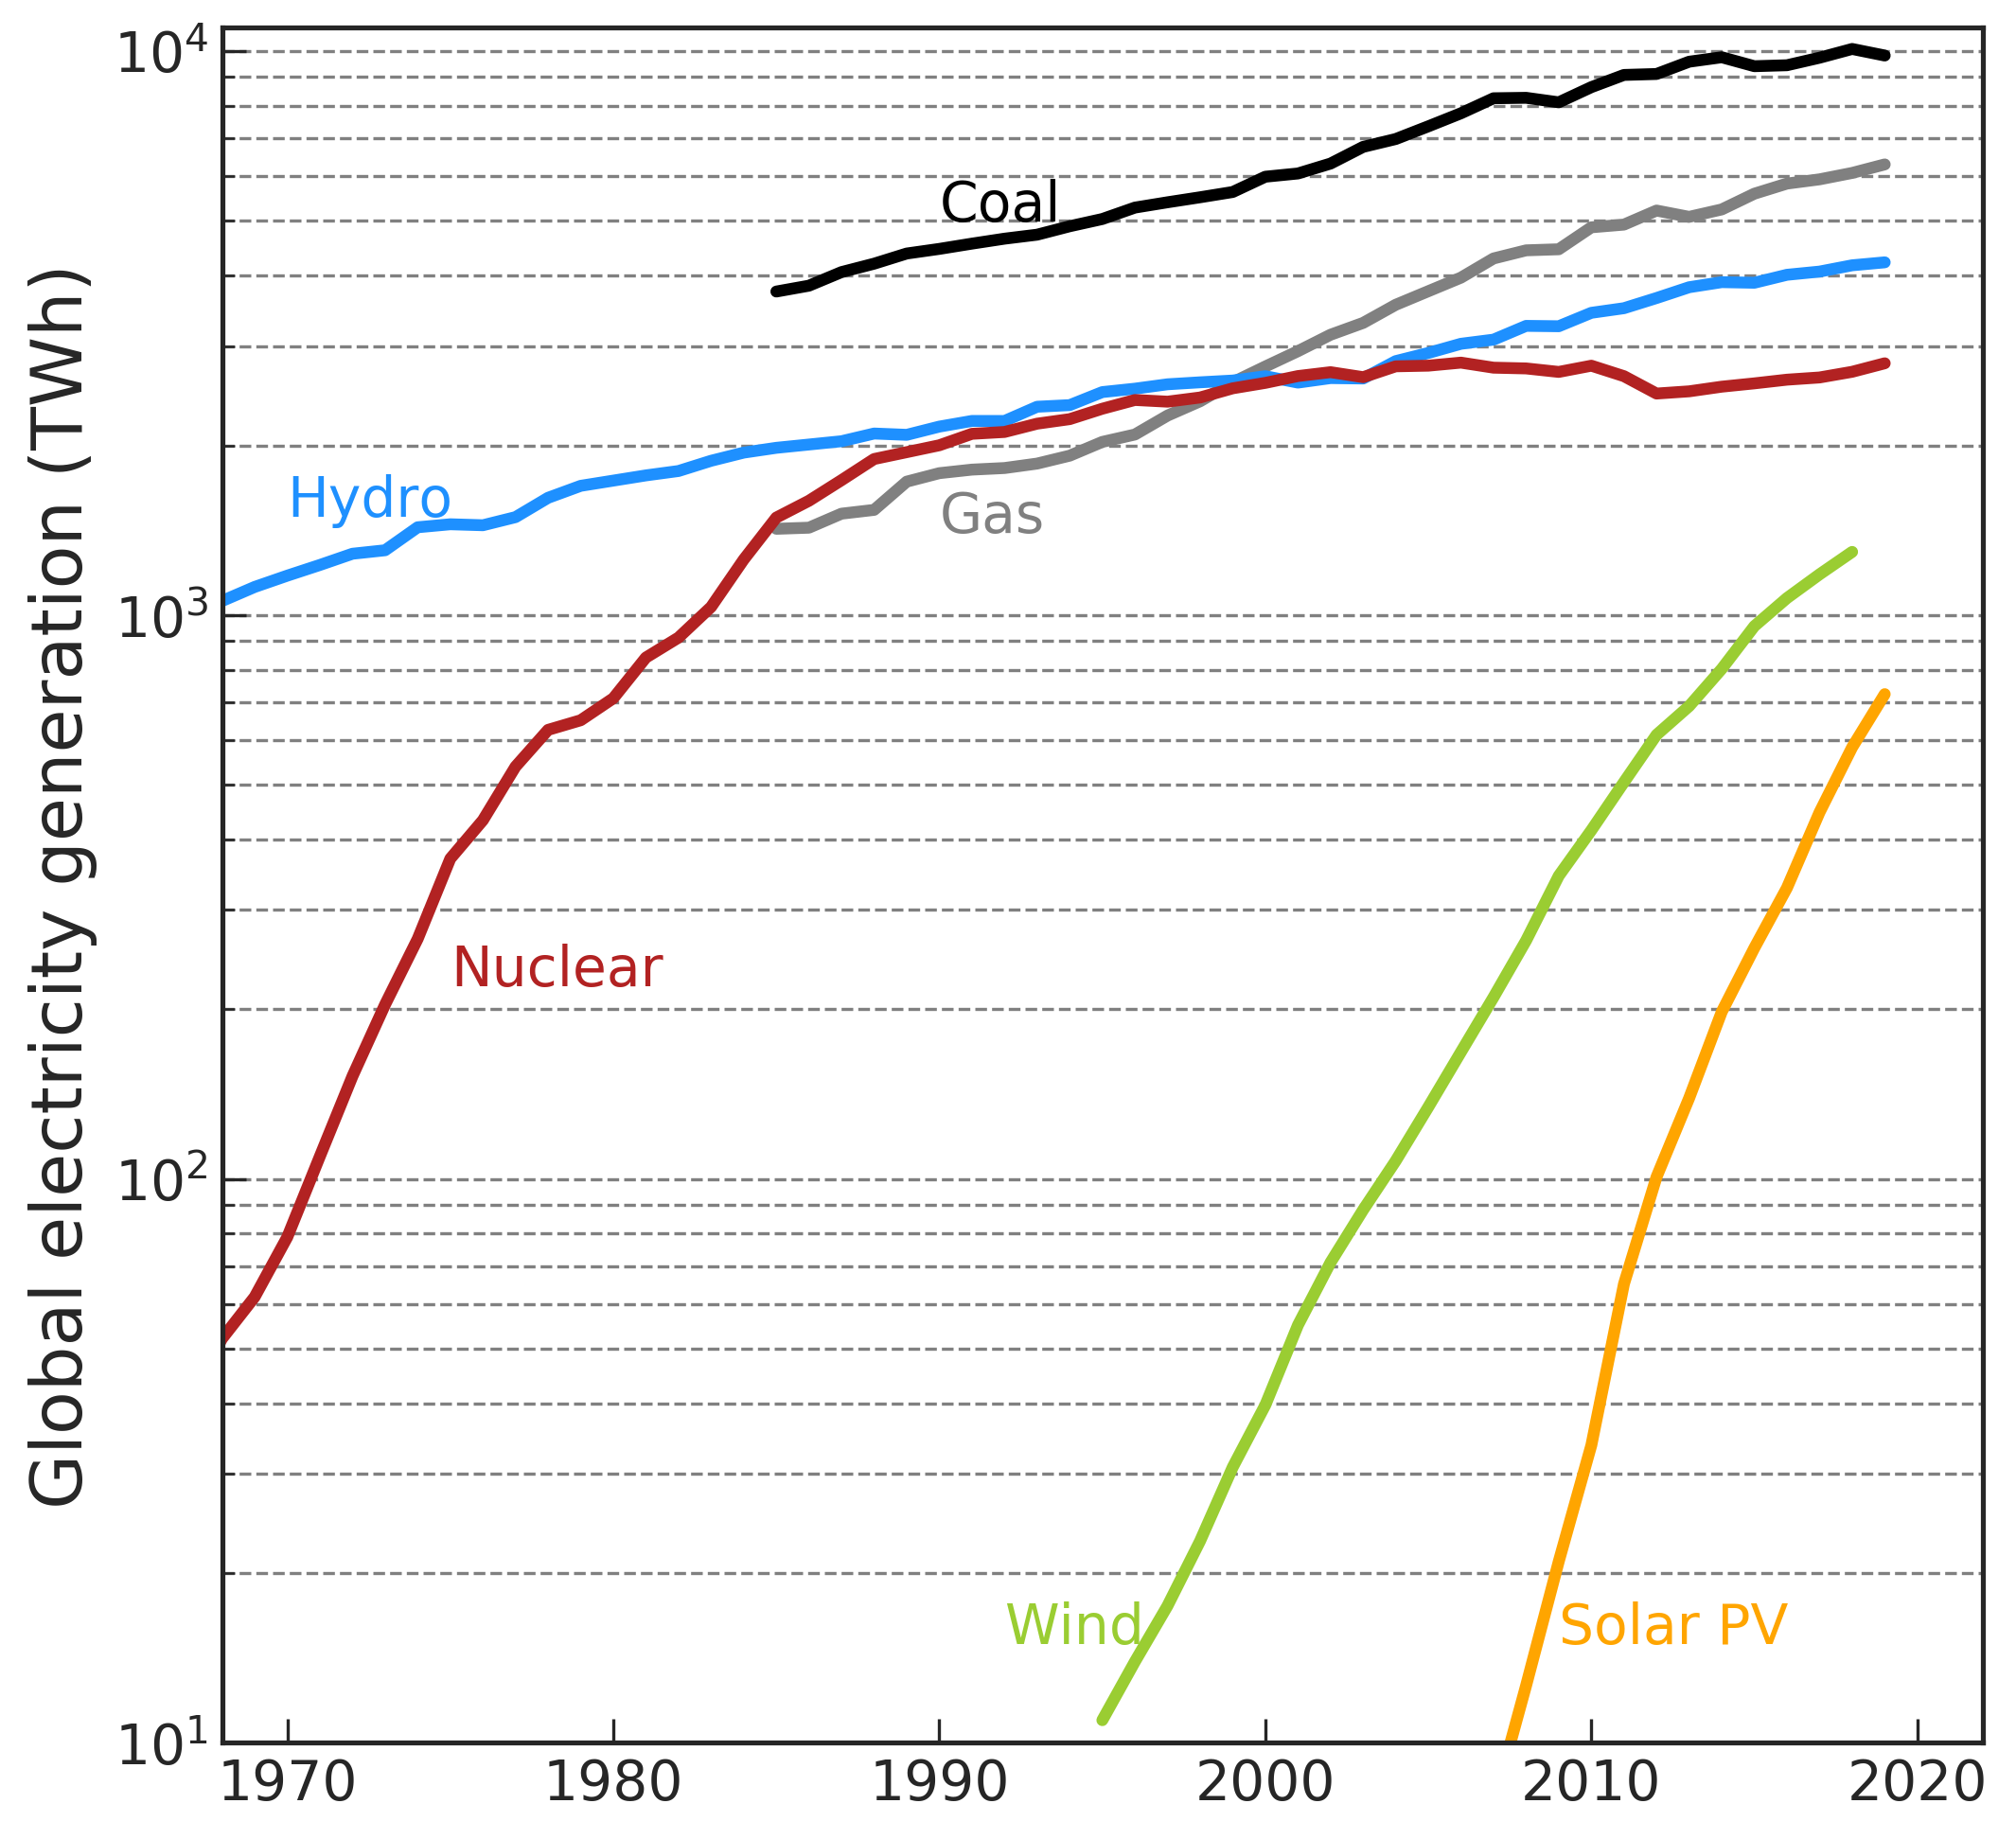 Historical expansion of electricity generation technologies